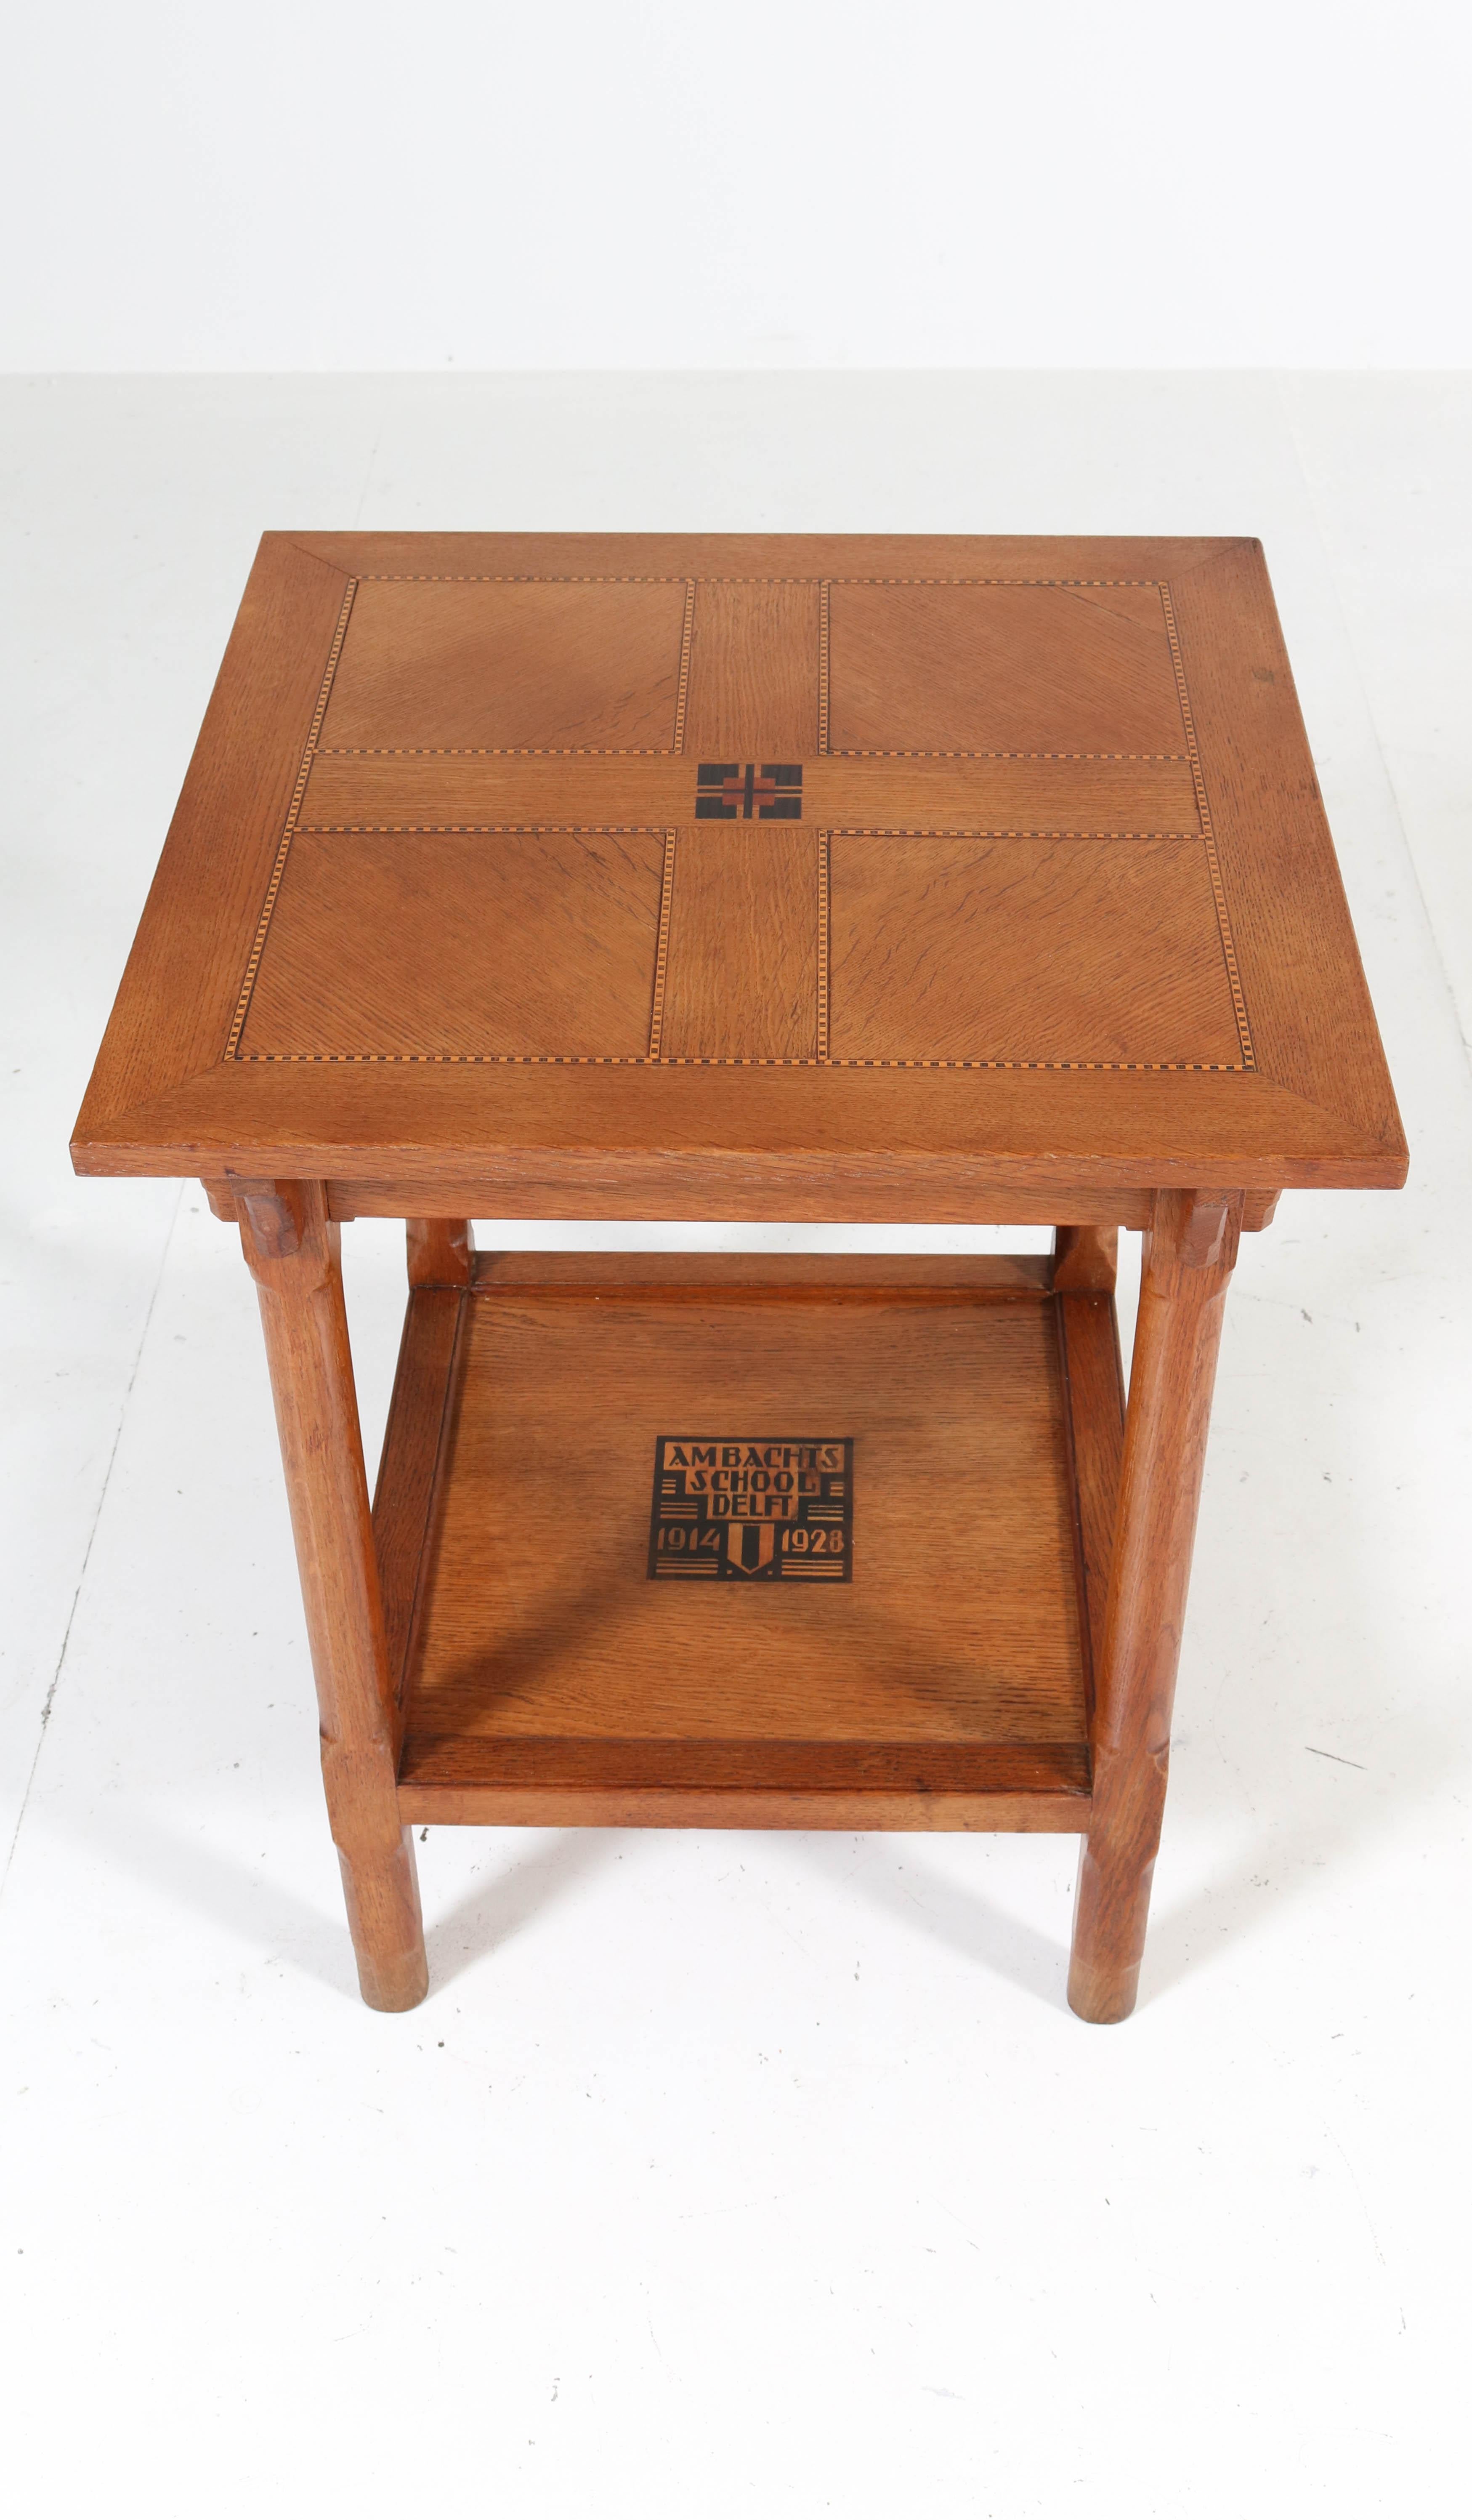 Stunning and rare Art Deco Amsterdam School coffee table.
This table has been executed by pupils of the Ambachts School delft in 1928.
Solid oak with inlay and description Ambachts School delft 1914-1928.
In very good original condition with